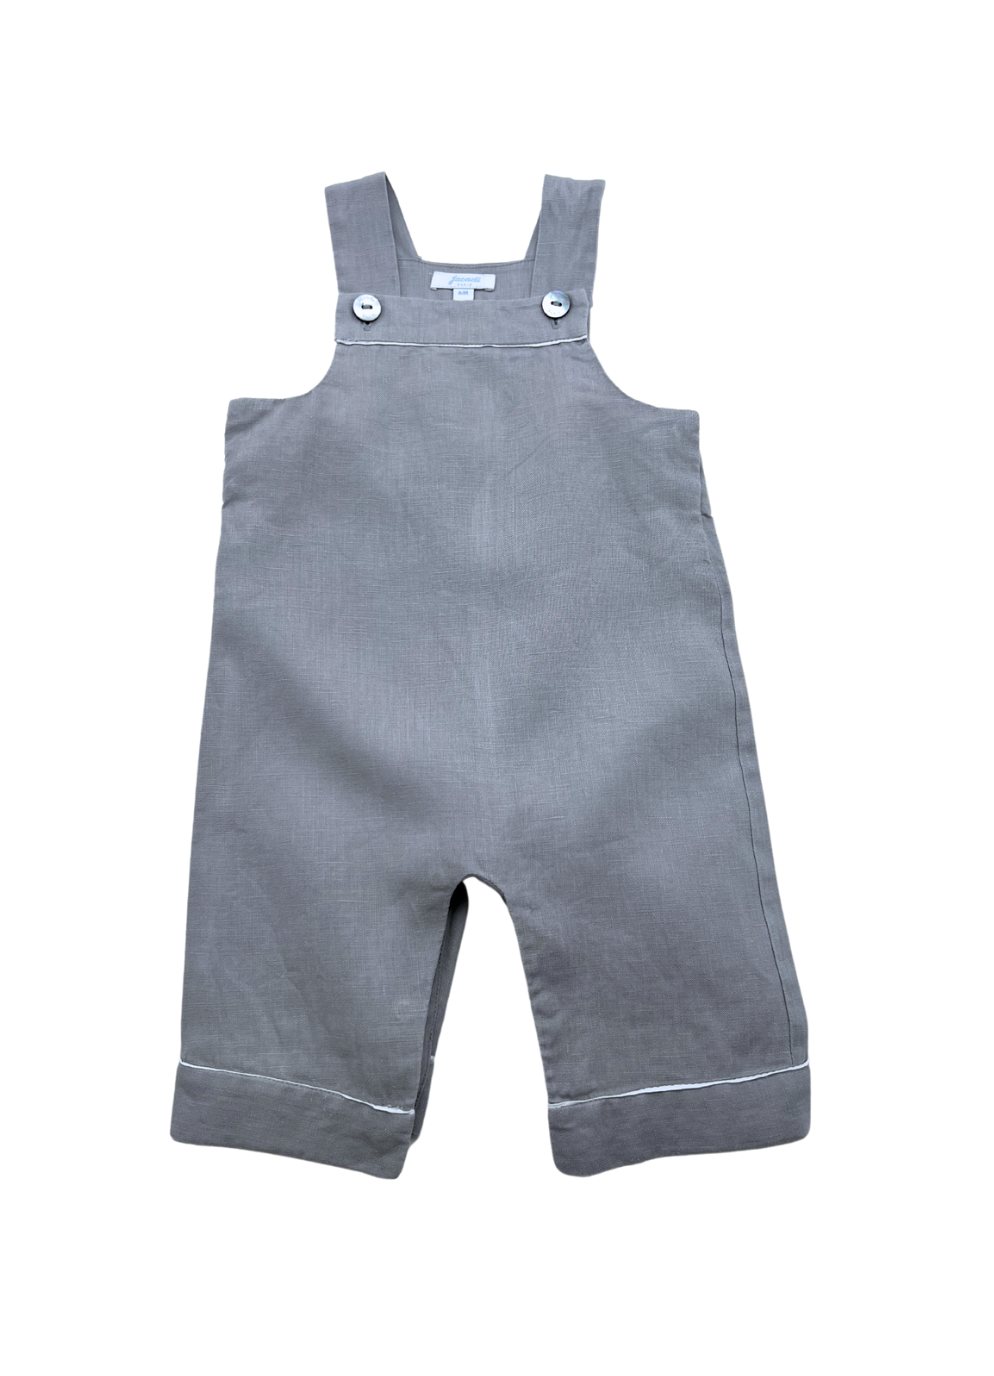 JACADI - Taupe linen dungarees - 6 months old